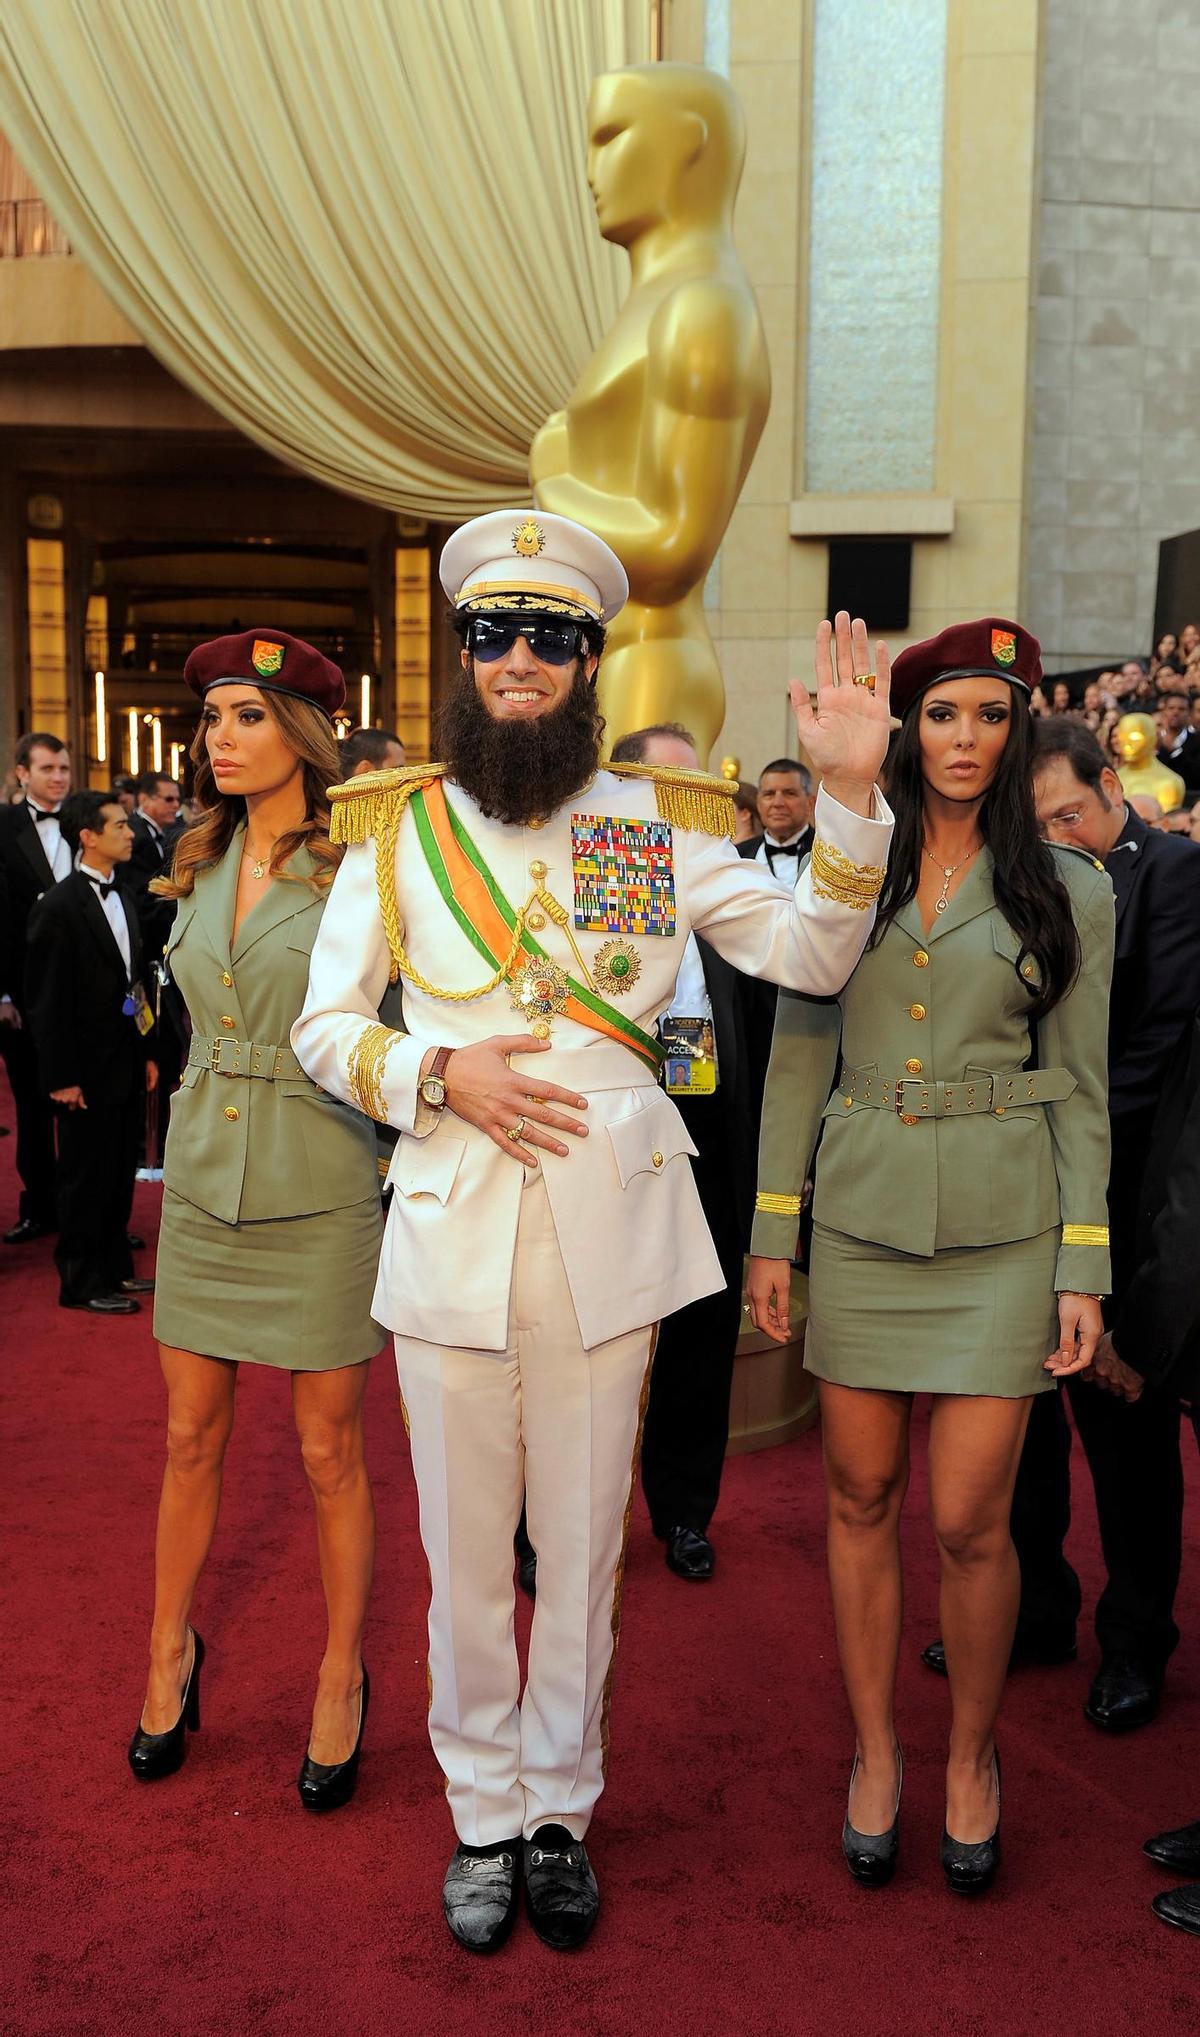 Sacha Baron Cohen, center, and guests arrive before the 84th Academy Awards on Sunday, Feb. 26, 2012, in the Hollywood section of Los Angeles. (AP Photo/Chris Pizzello)